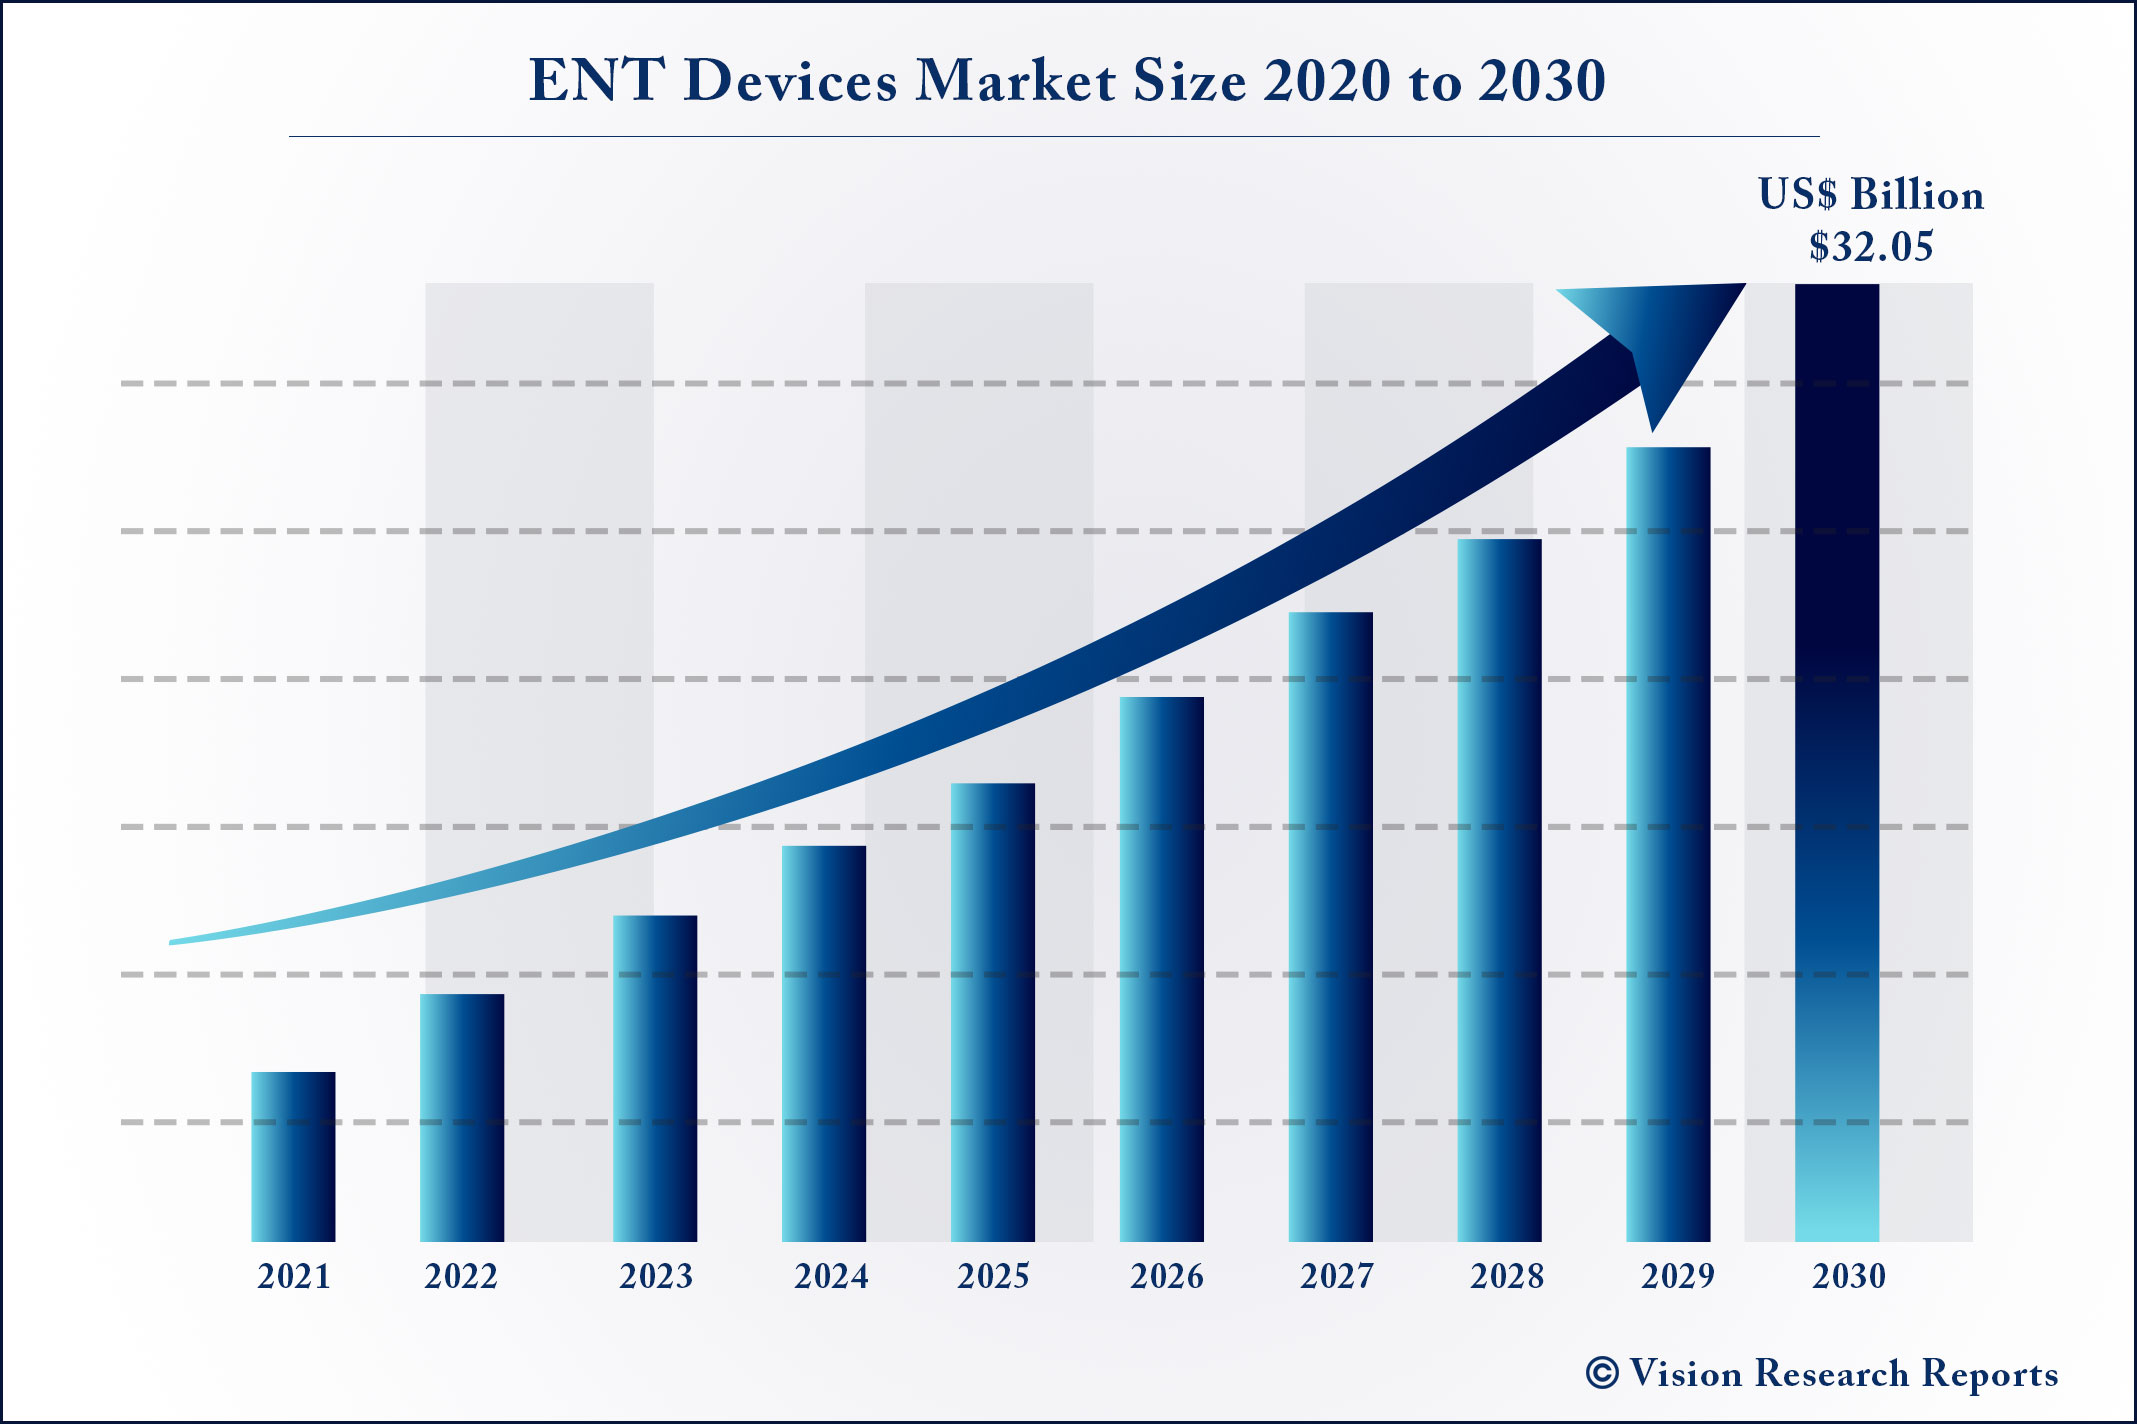 ENT Devices Market Size 2020 to 2030